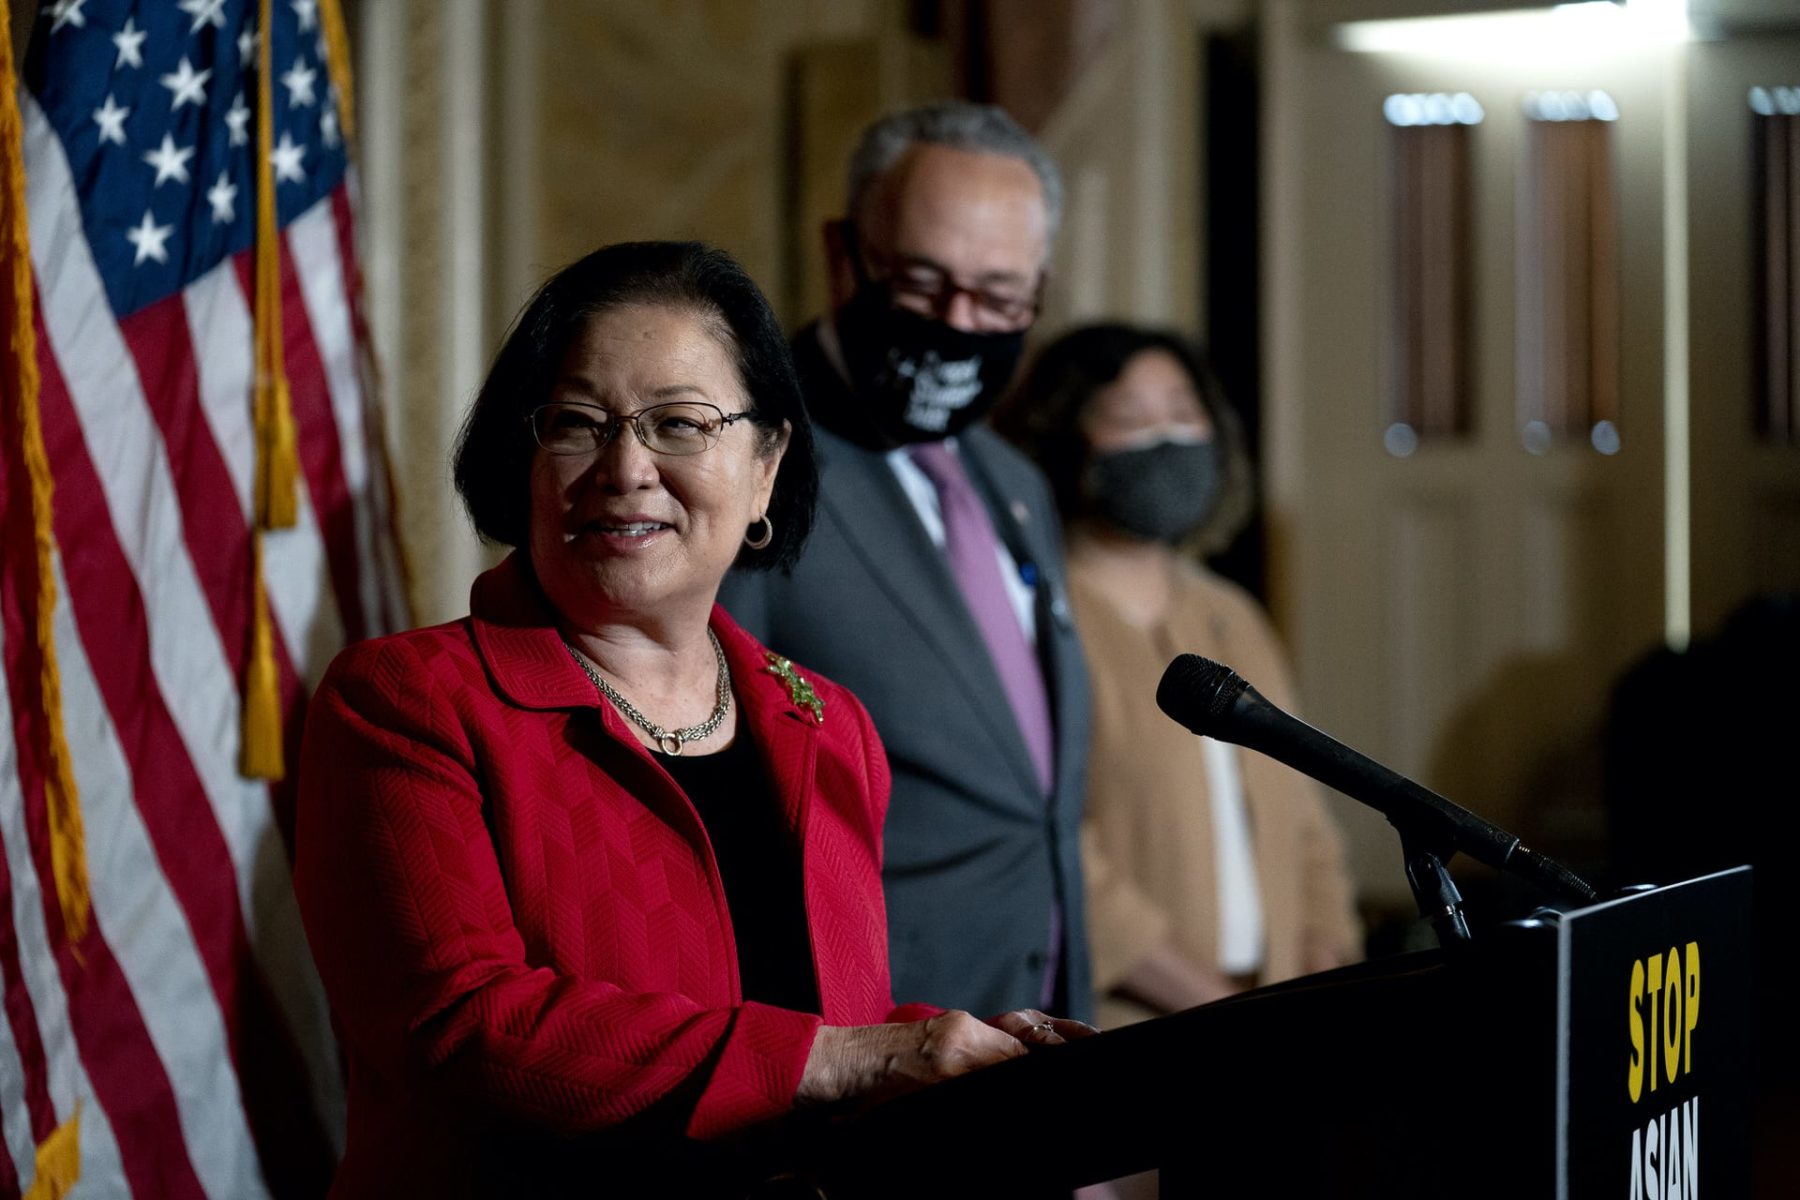 U.S. Sen. Mazie Hirono (D-HI) speaks during a press conference on the COVID-19 Hate Crimes Act at the U.S. Capitol on April 13, 2021 in Washington, DC. The legislation aims to address the rise of hate crimes and violence targeted at the Asian American and Pacific Islander community related to the COVID-19 pandemic.